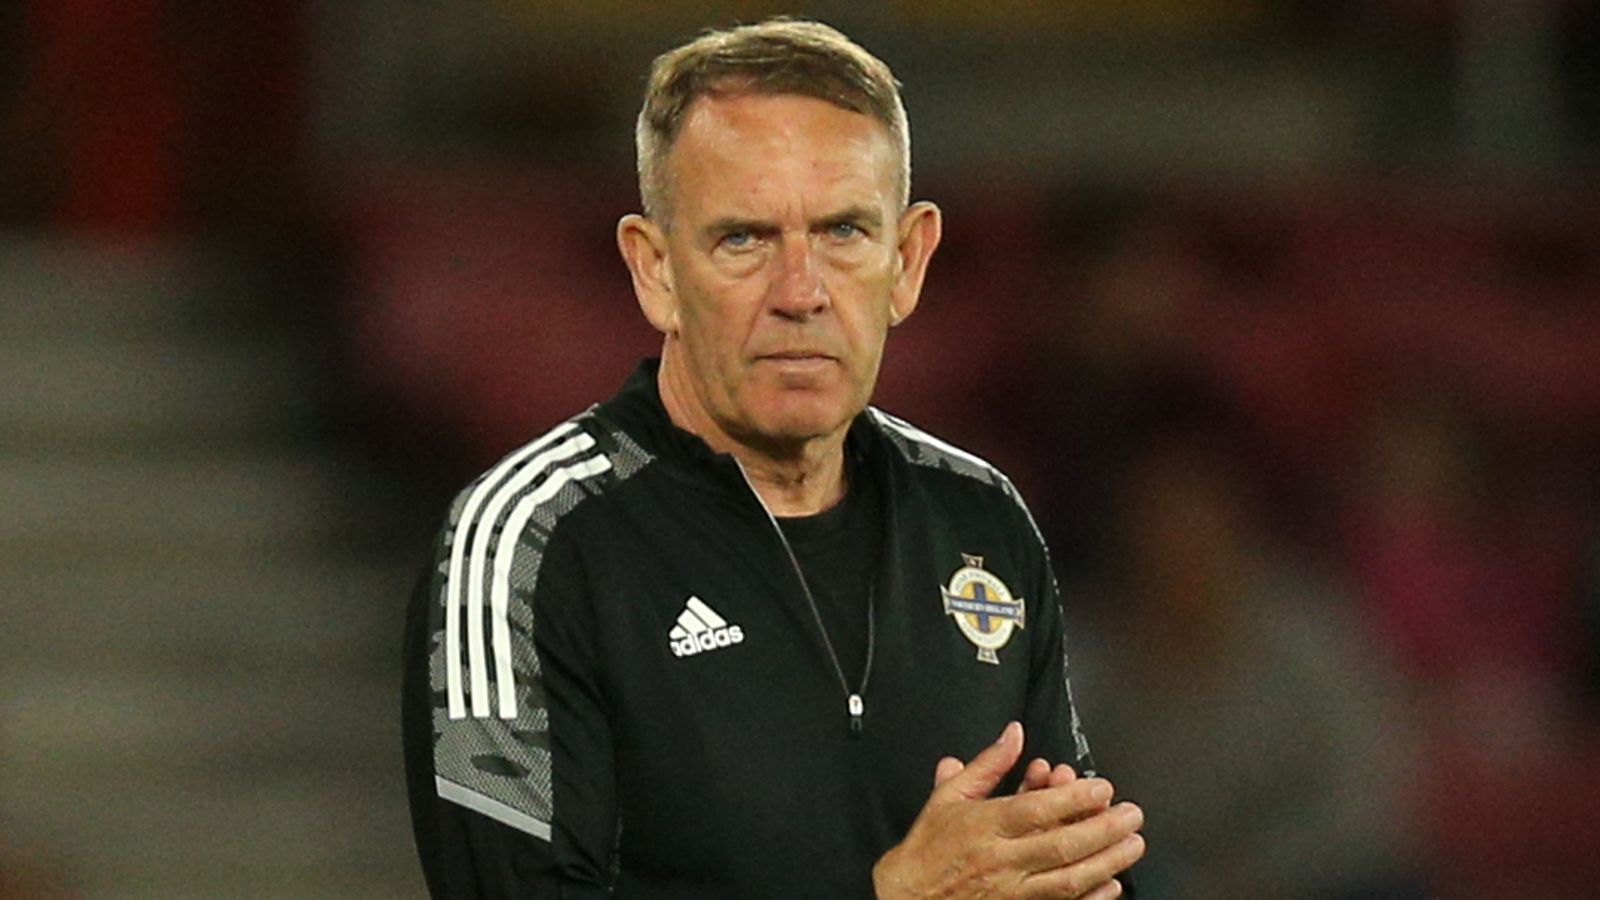 Kenny Shiels leaves role as Northern Ireland Women’s manager